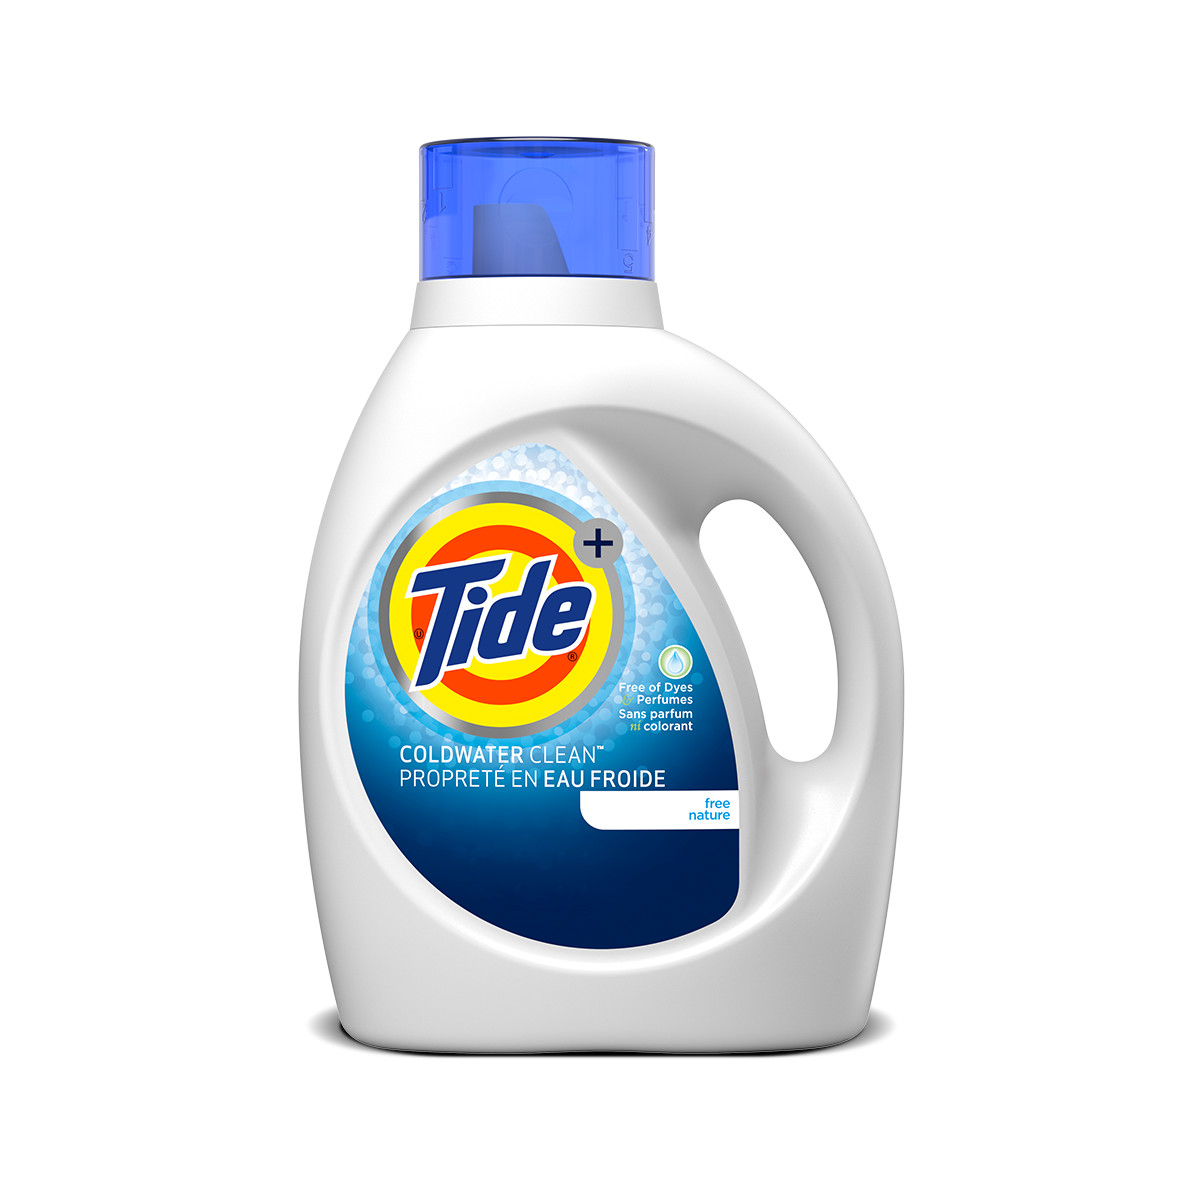 Tide Coldwater Clean Free HE Liquid Laundry Detergent